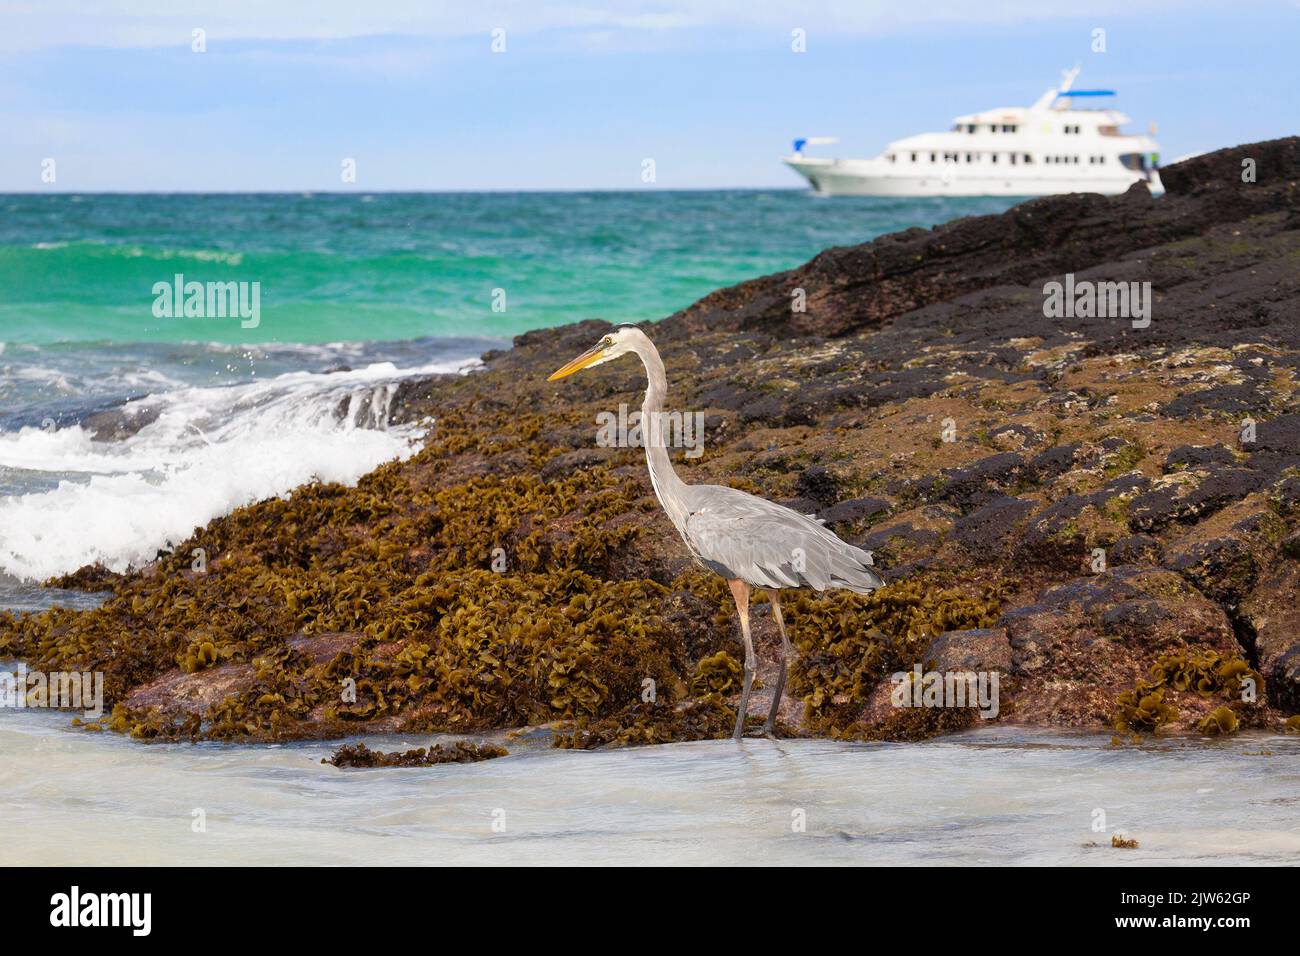 Great Blue Heron bird (Ardea herodias) wading along the rocky coast of San Cristobal Island in the Galapagos Islands with cruise boat in background Stock Photo